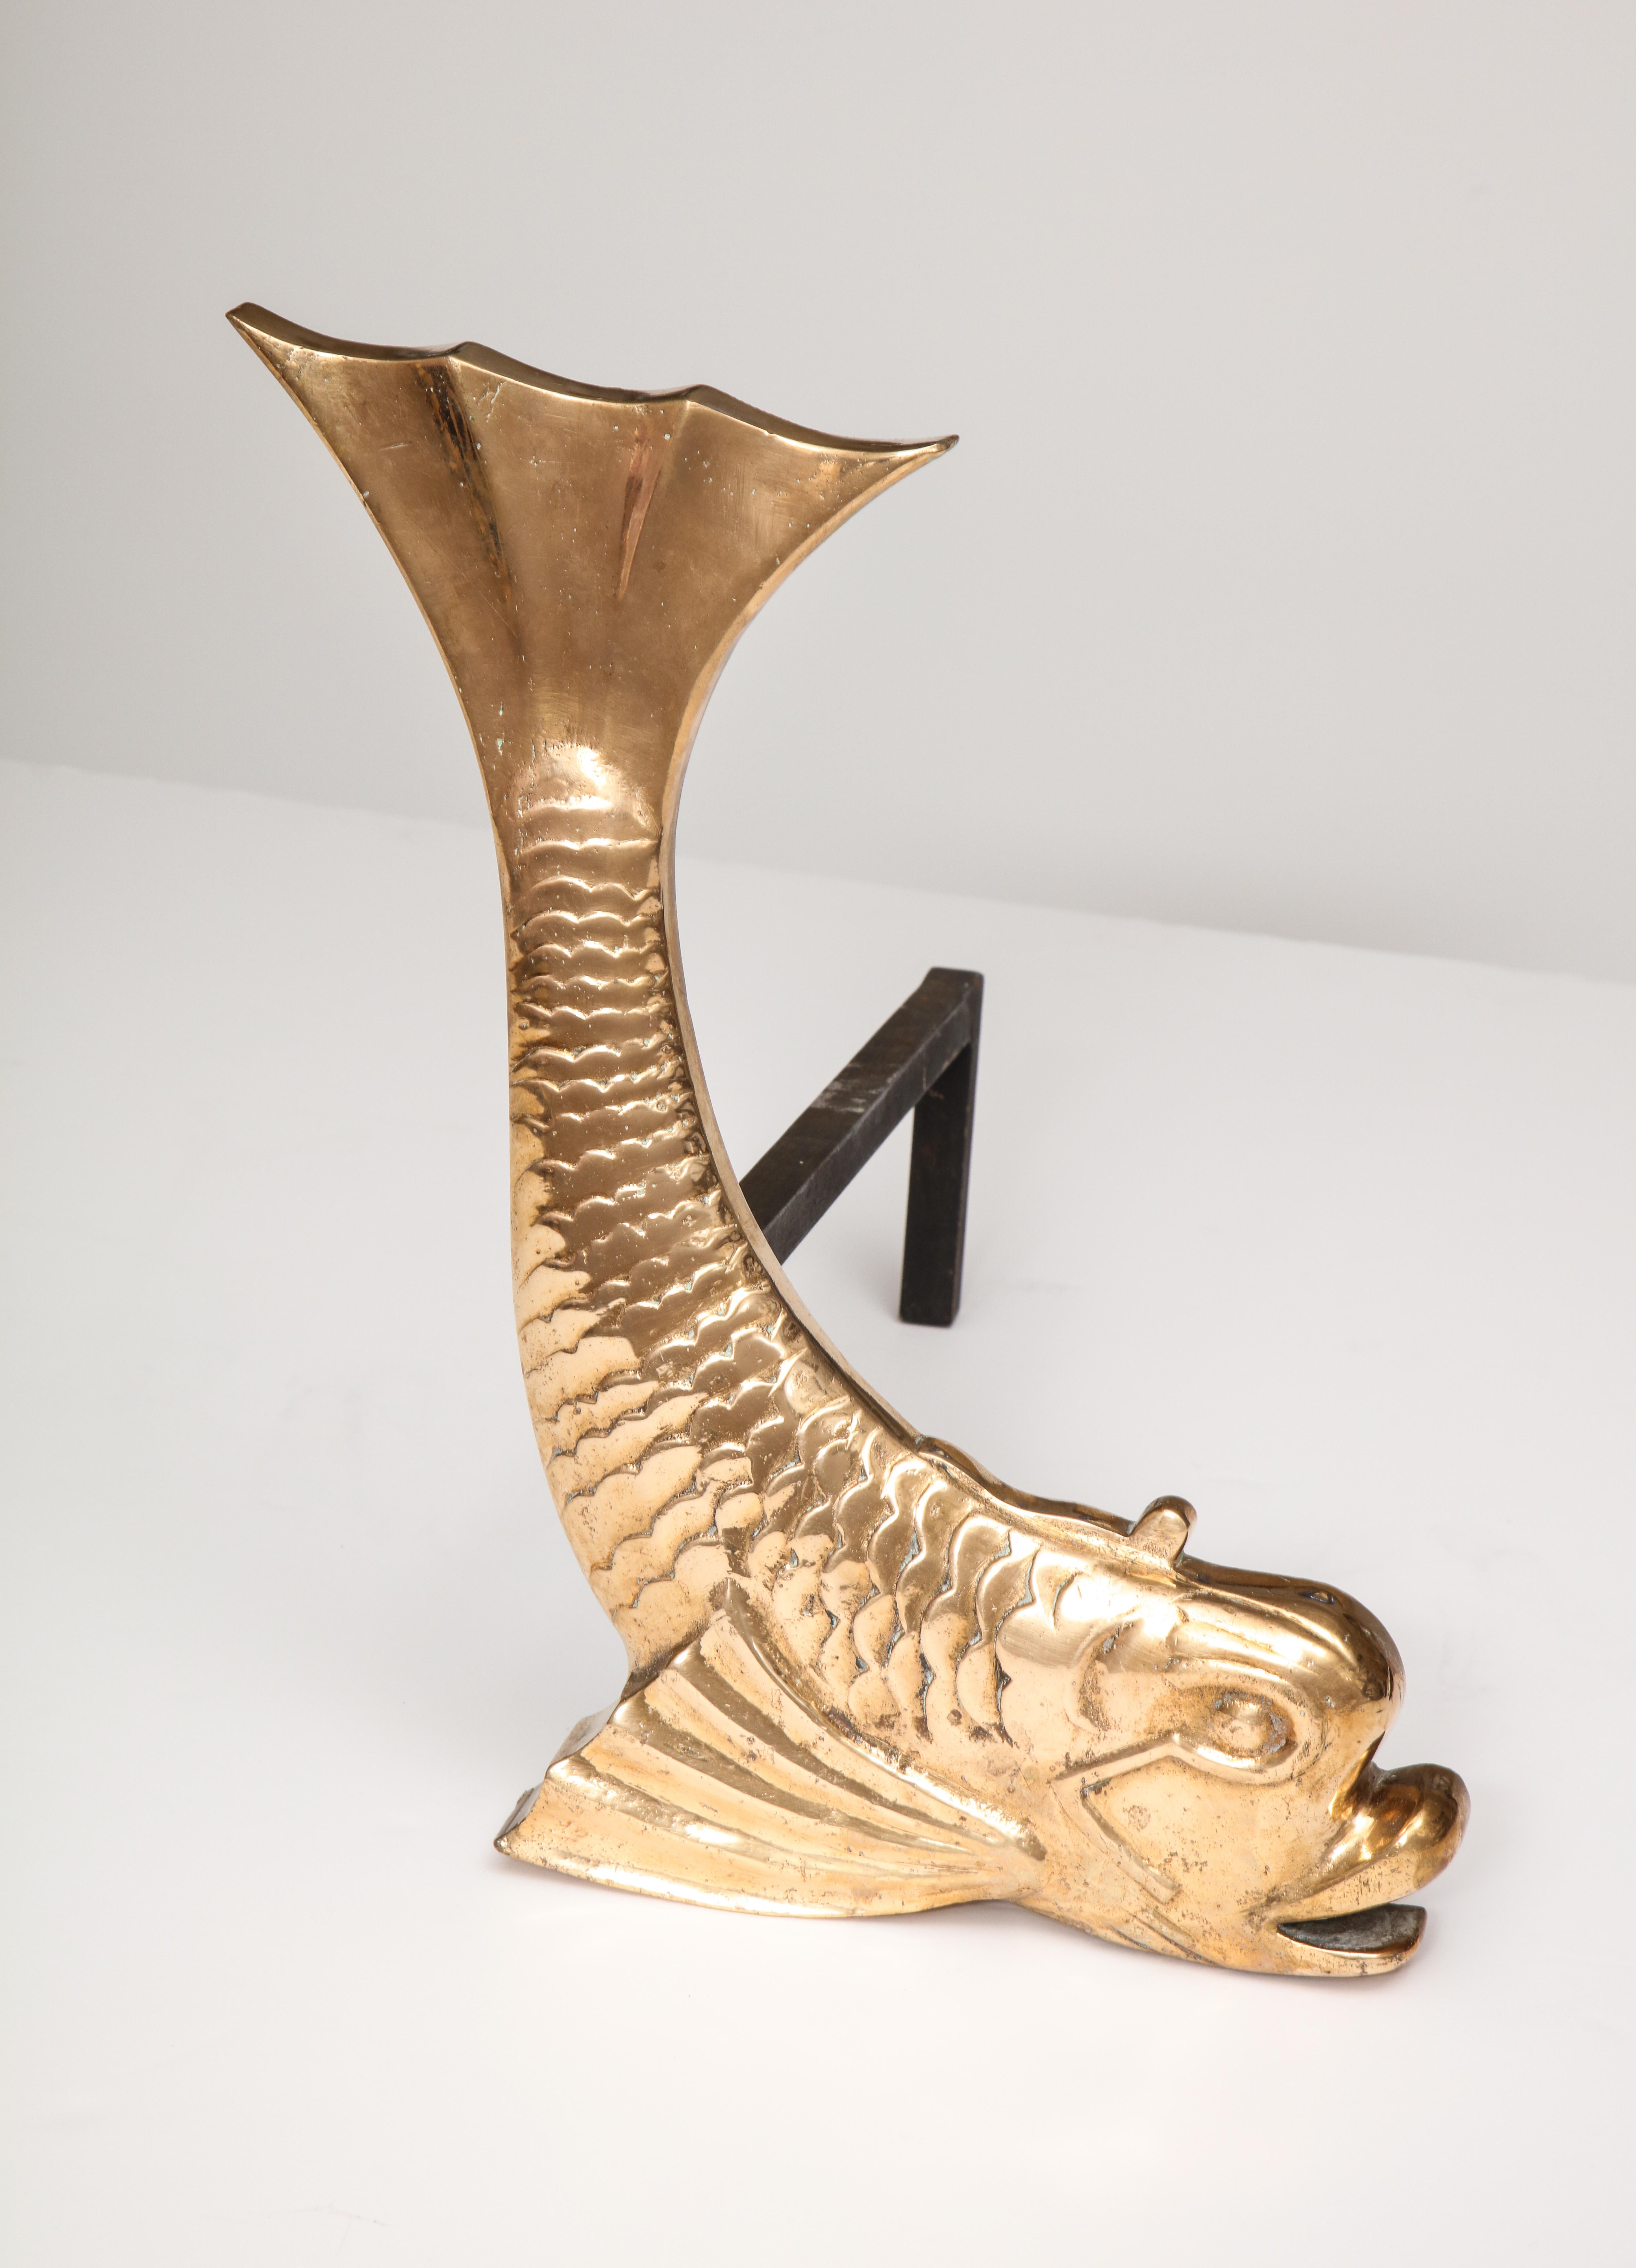 North American Pair of Midcentury Brass Dolphin Form Andirons